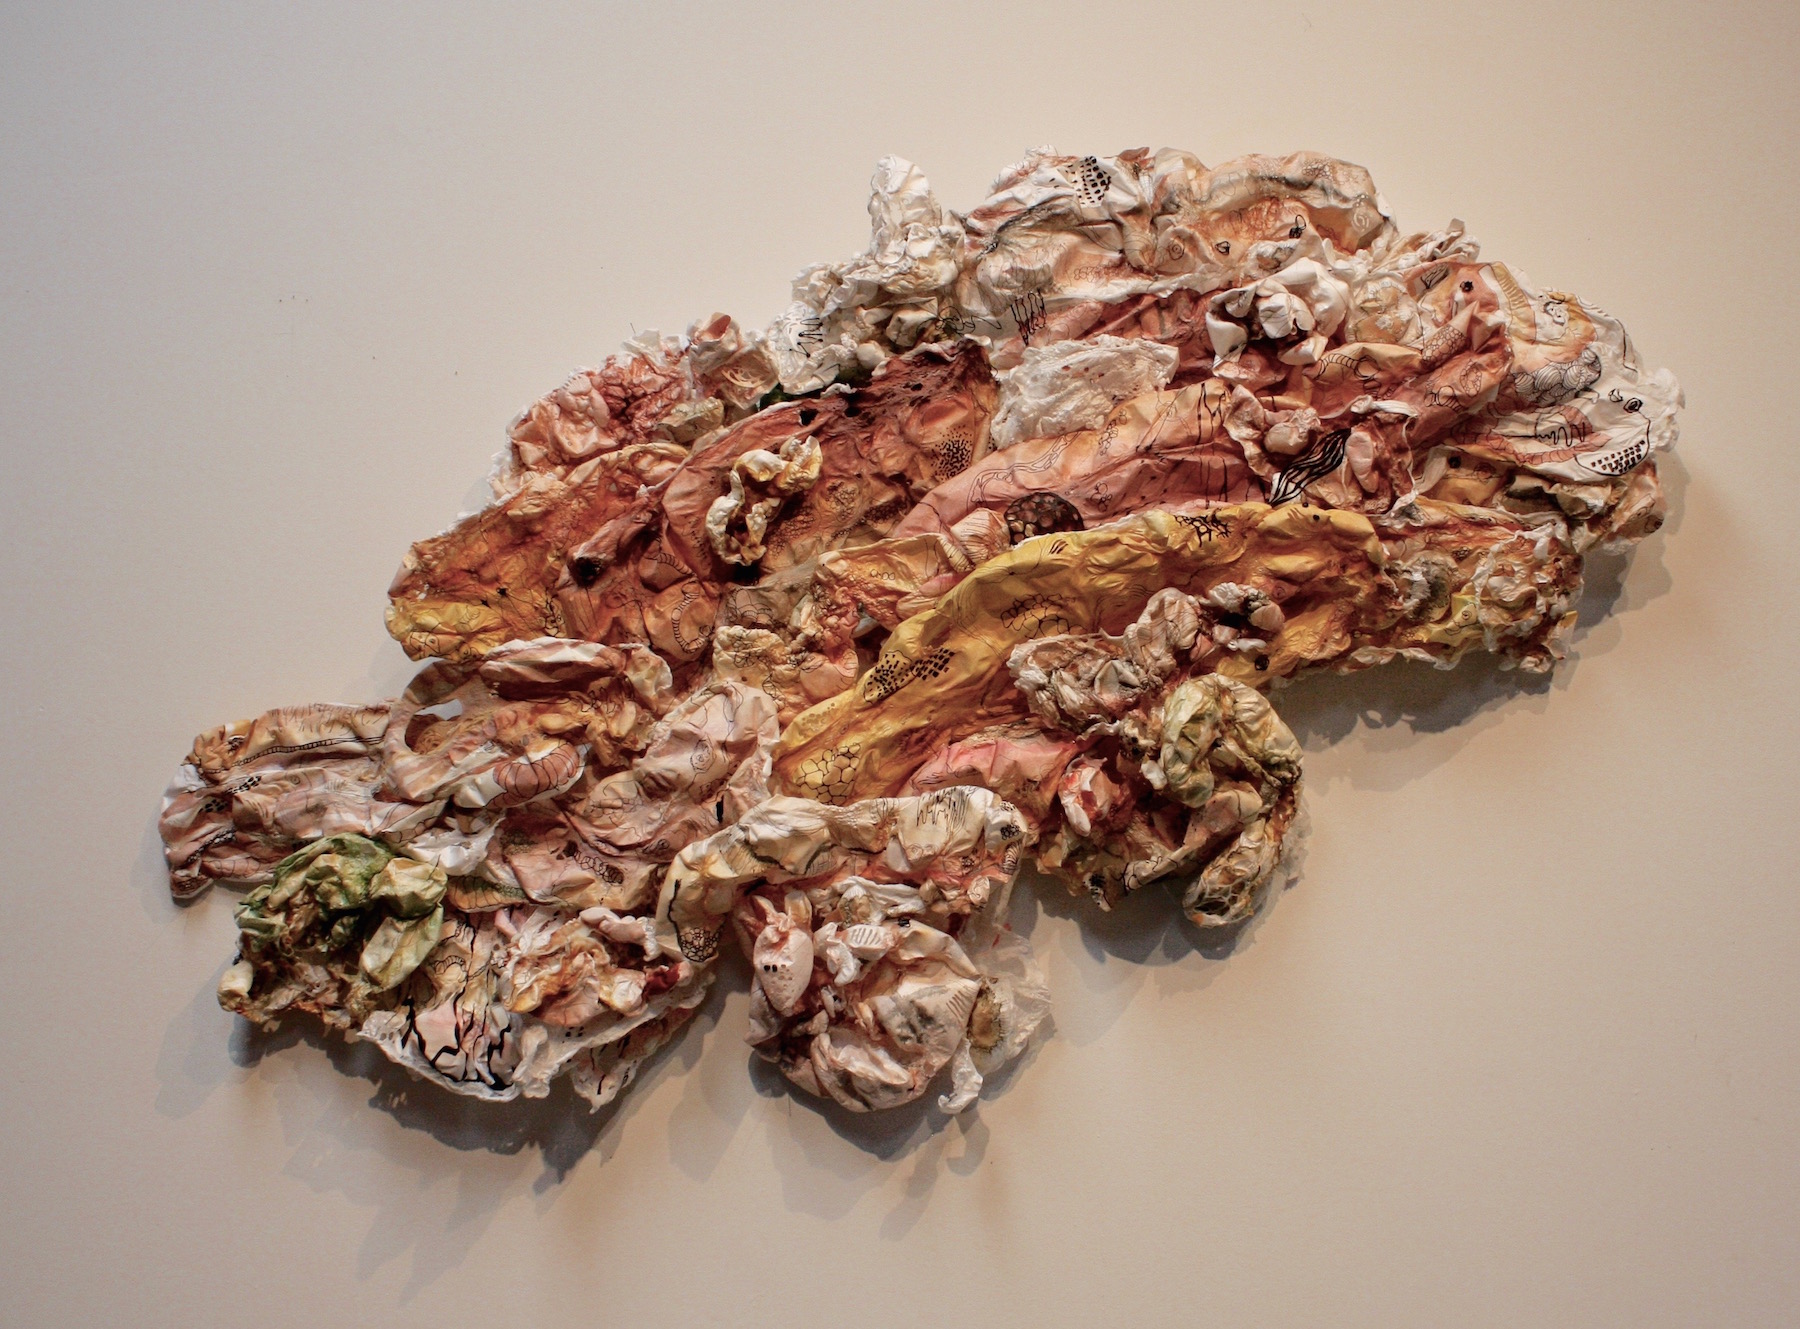   Flesh and Bone , acrylic on cut and molded Tyvek; mixed media, 51" x 38" (approx.) 